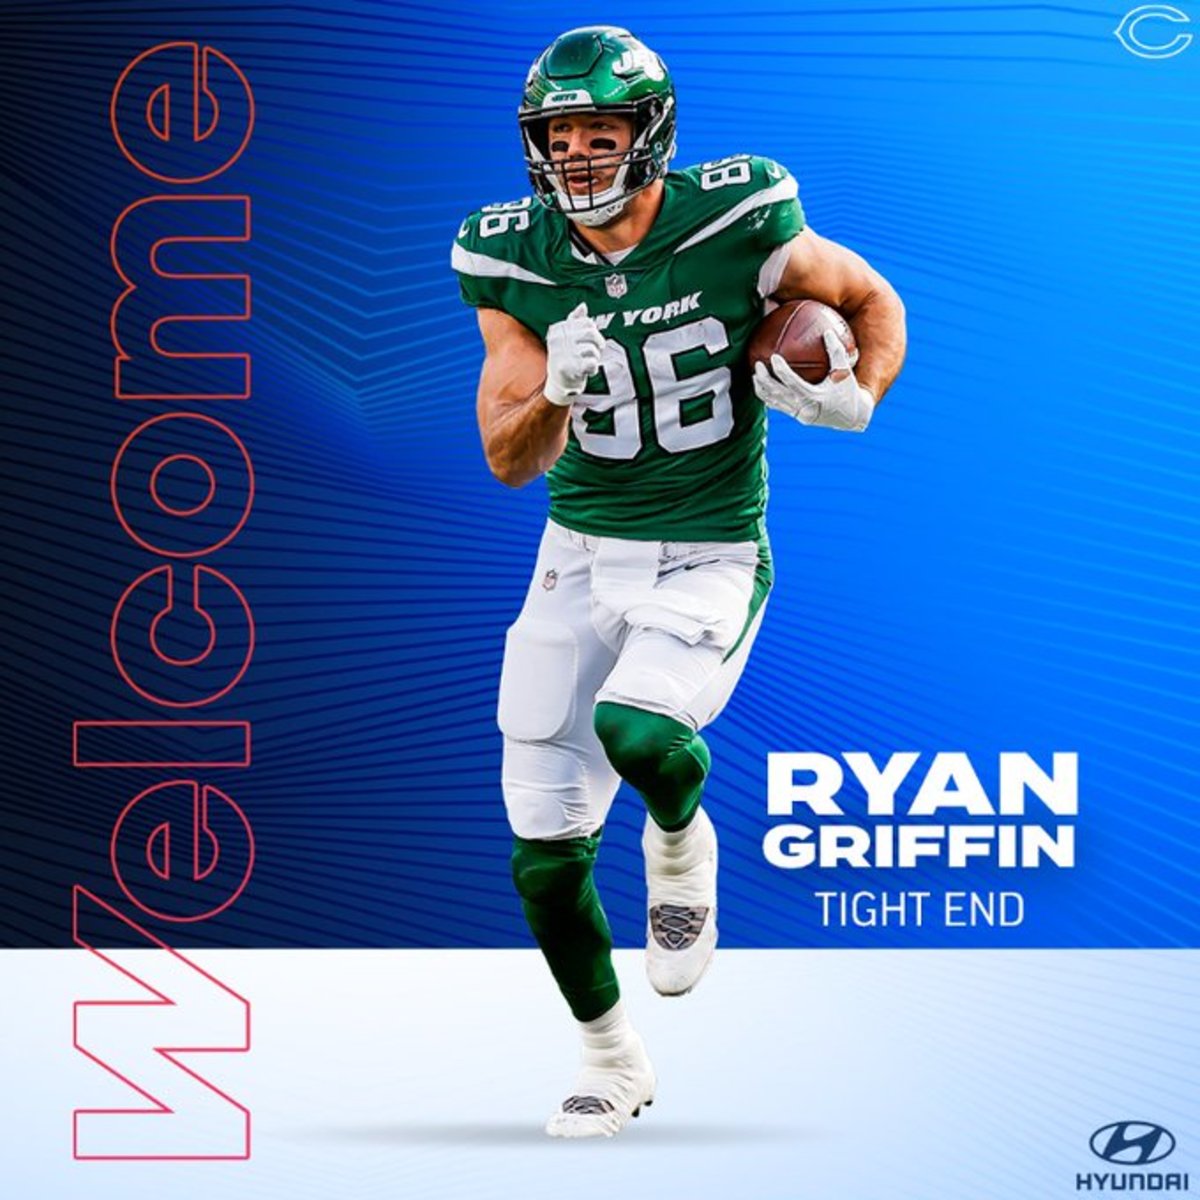 Ryan Griffin Chicago Bears tight end